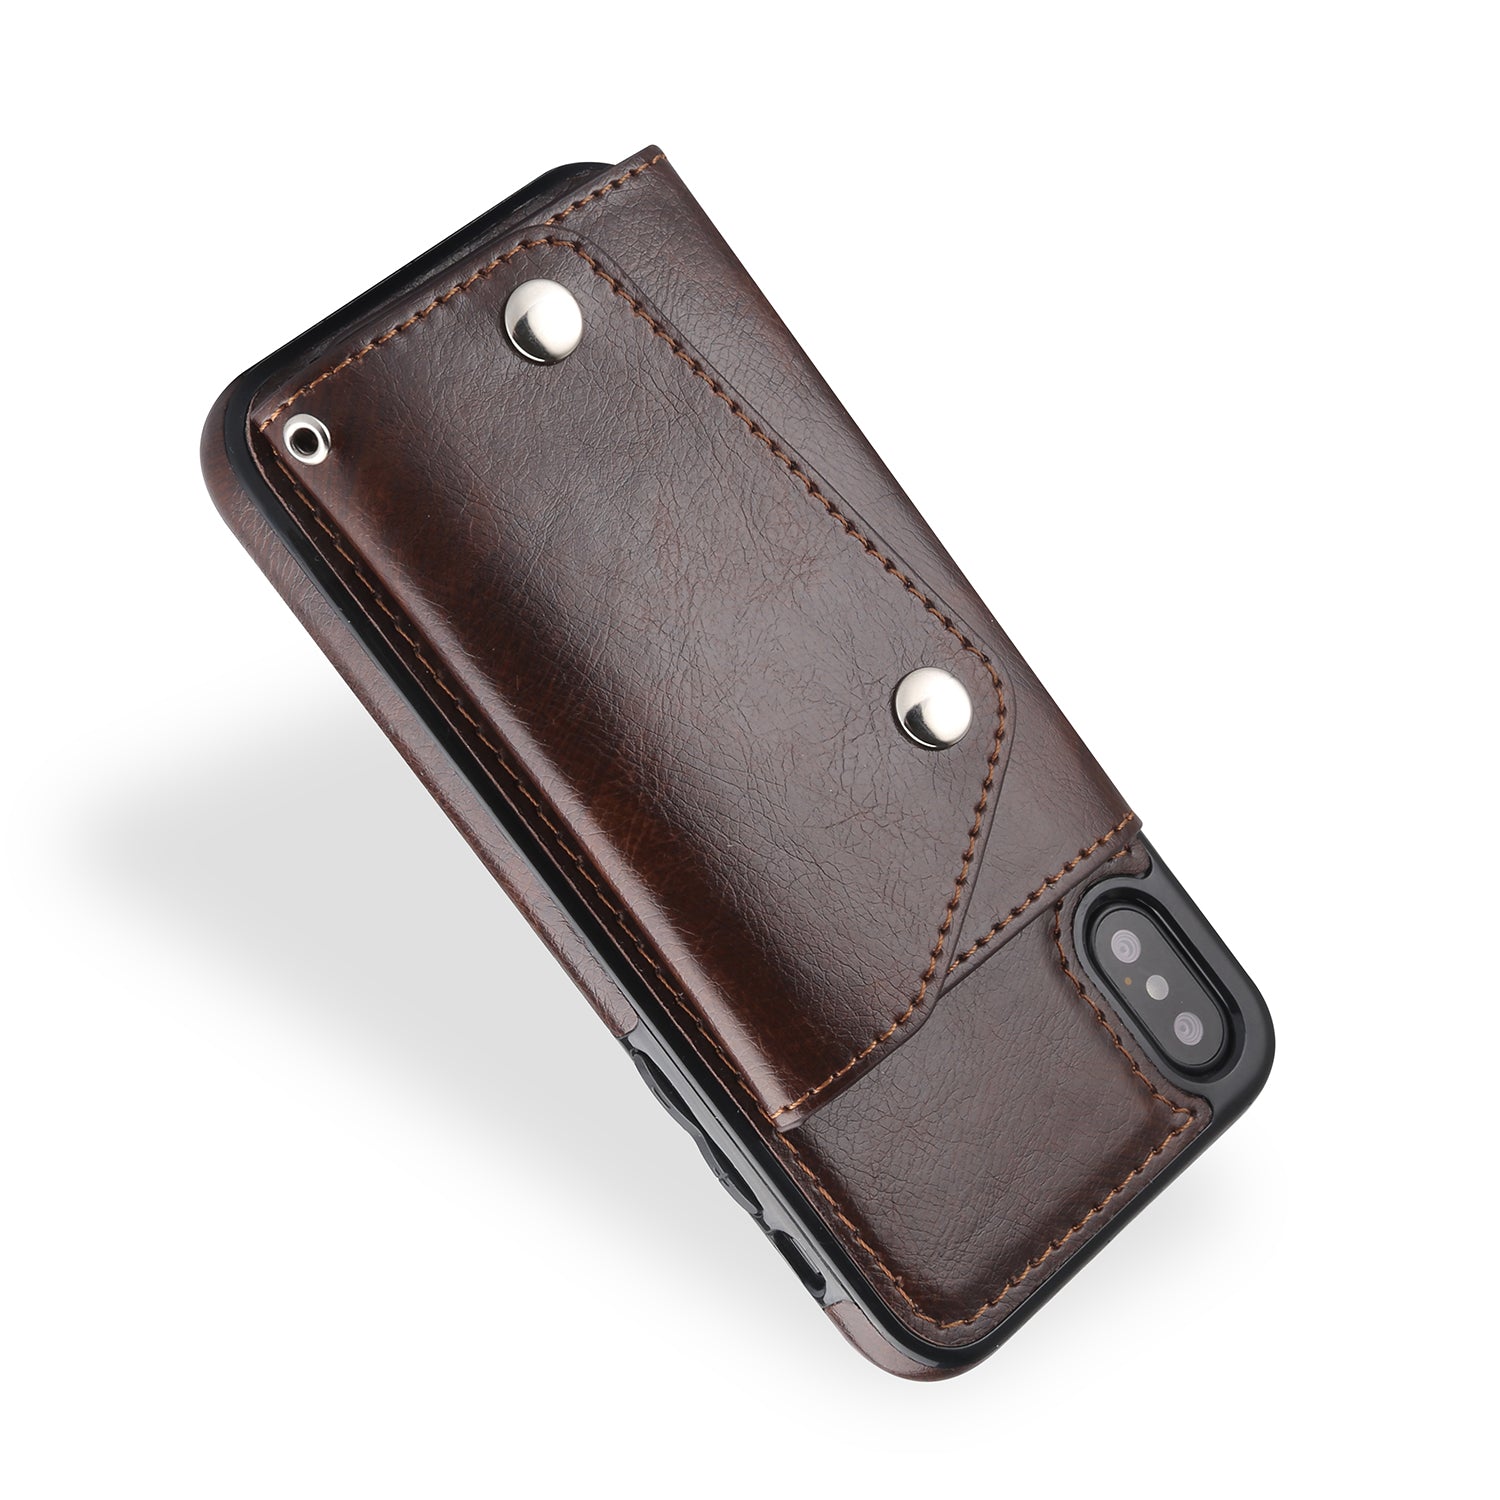 iPhone Xs Max (6.5") 2 in 1 Leather Wallet Case With 9 Credit Card Slots and Removable Back Cover 